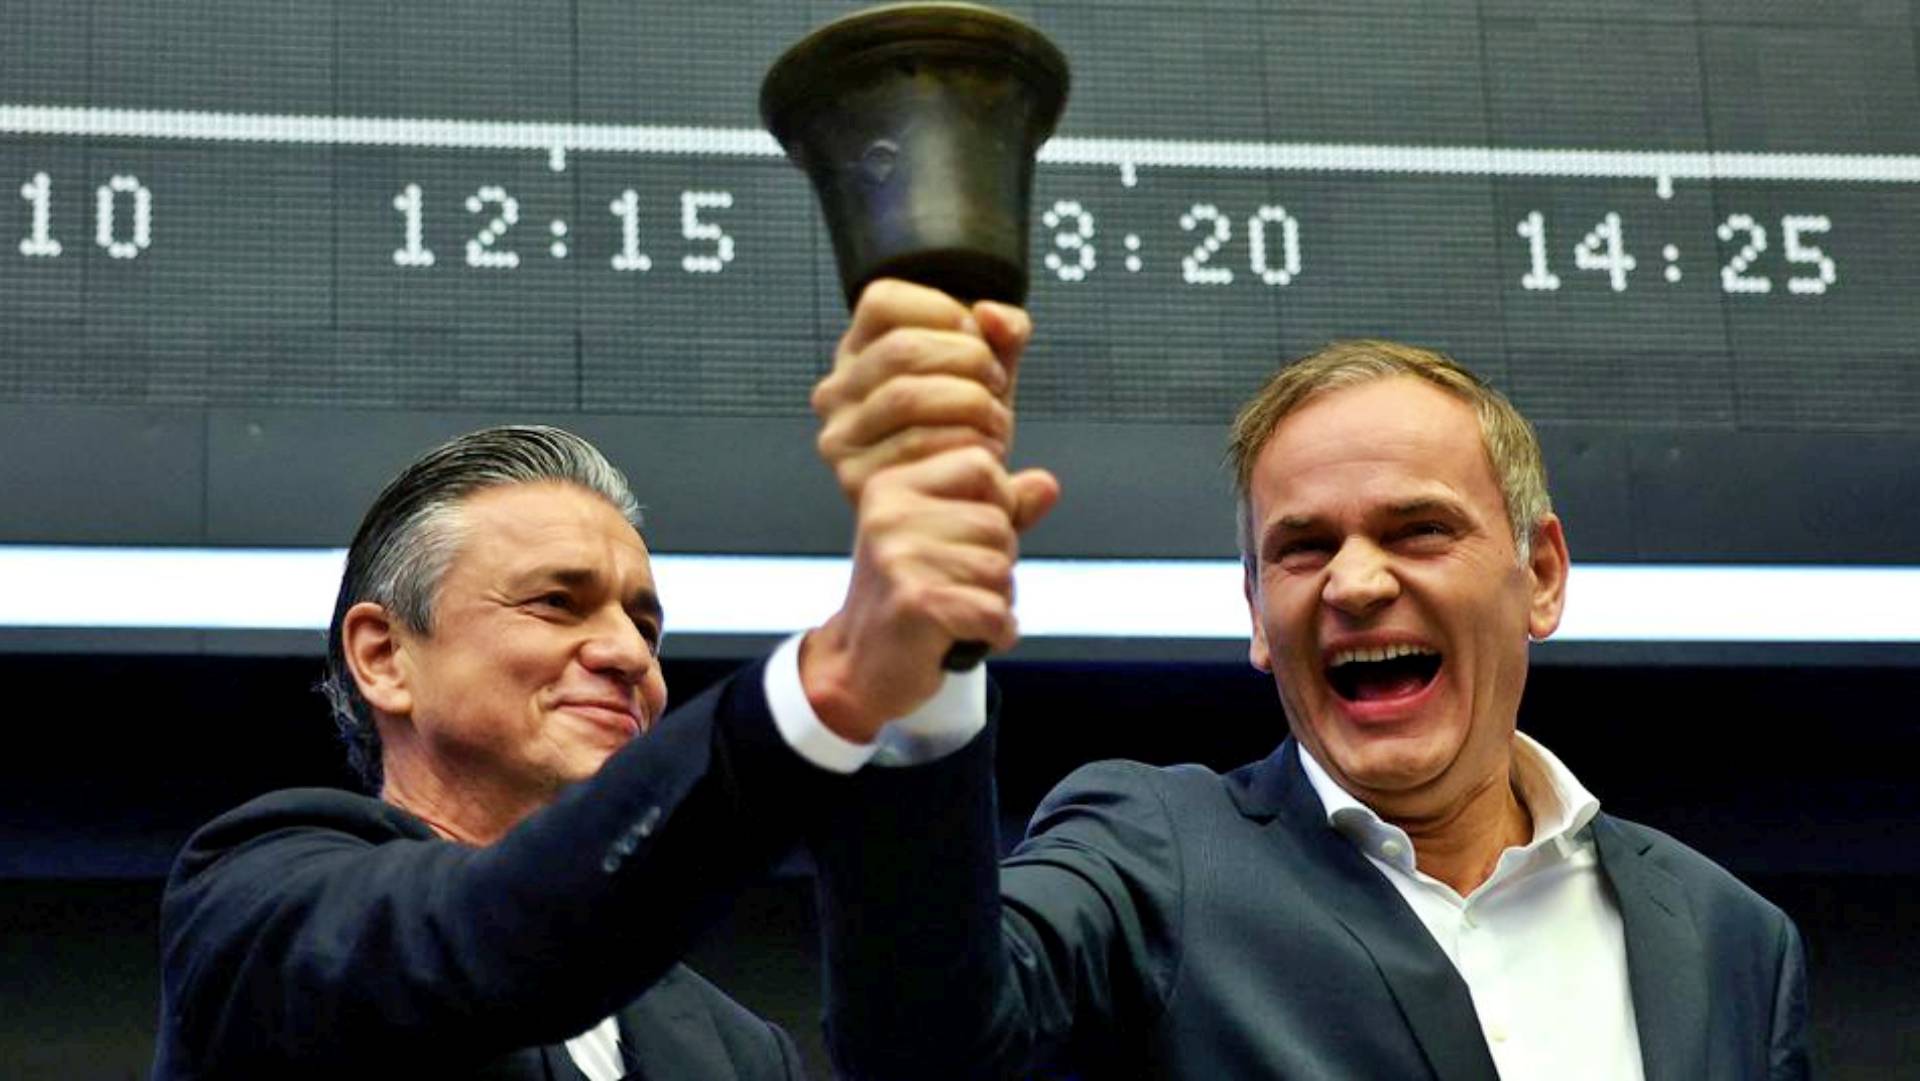 Oliver Blume (right) and Lutz Maschke ringing the bell in Frankfurt